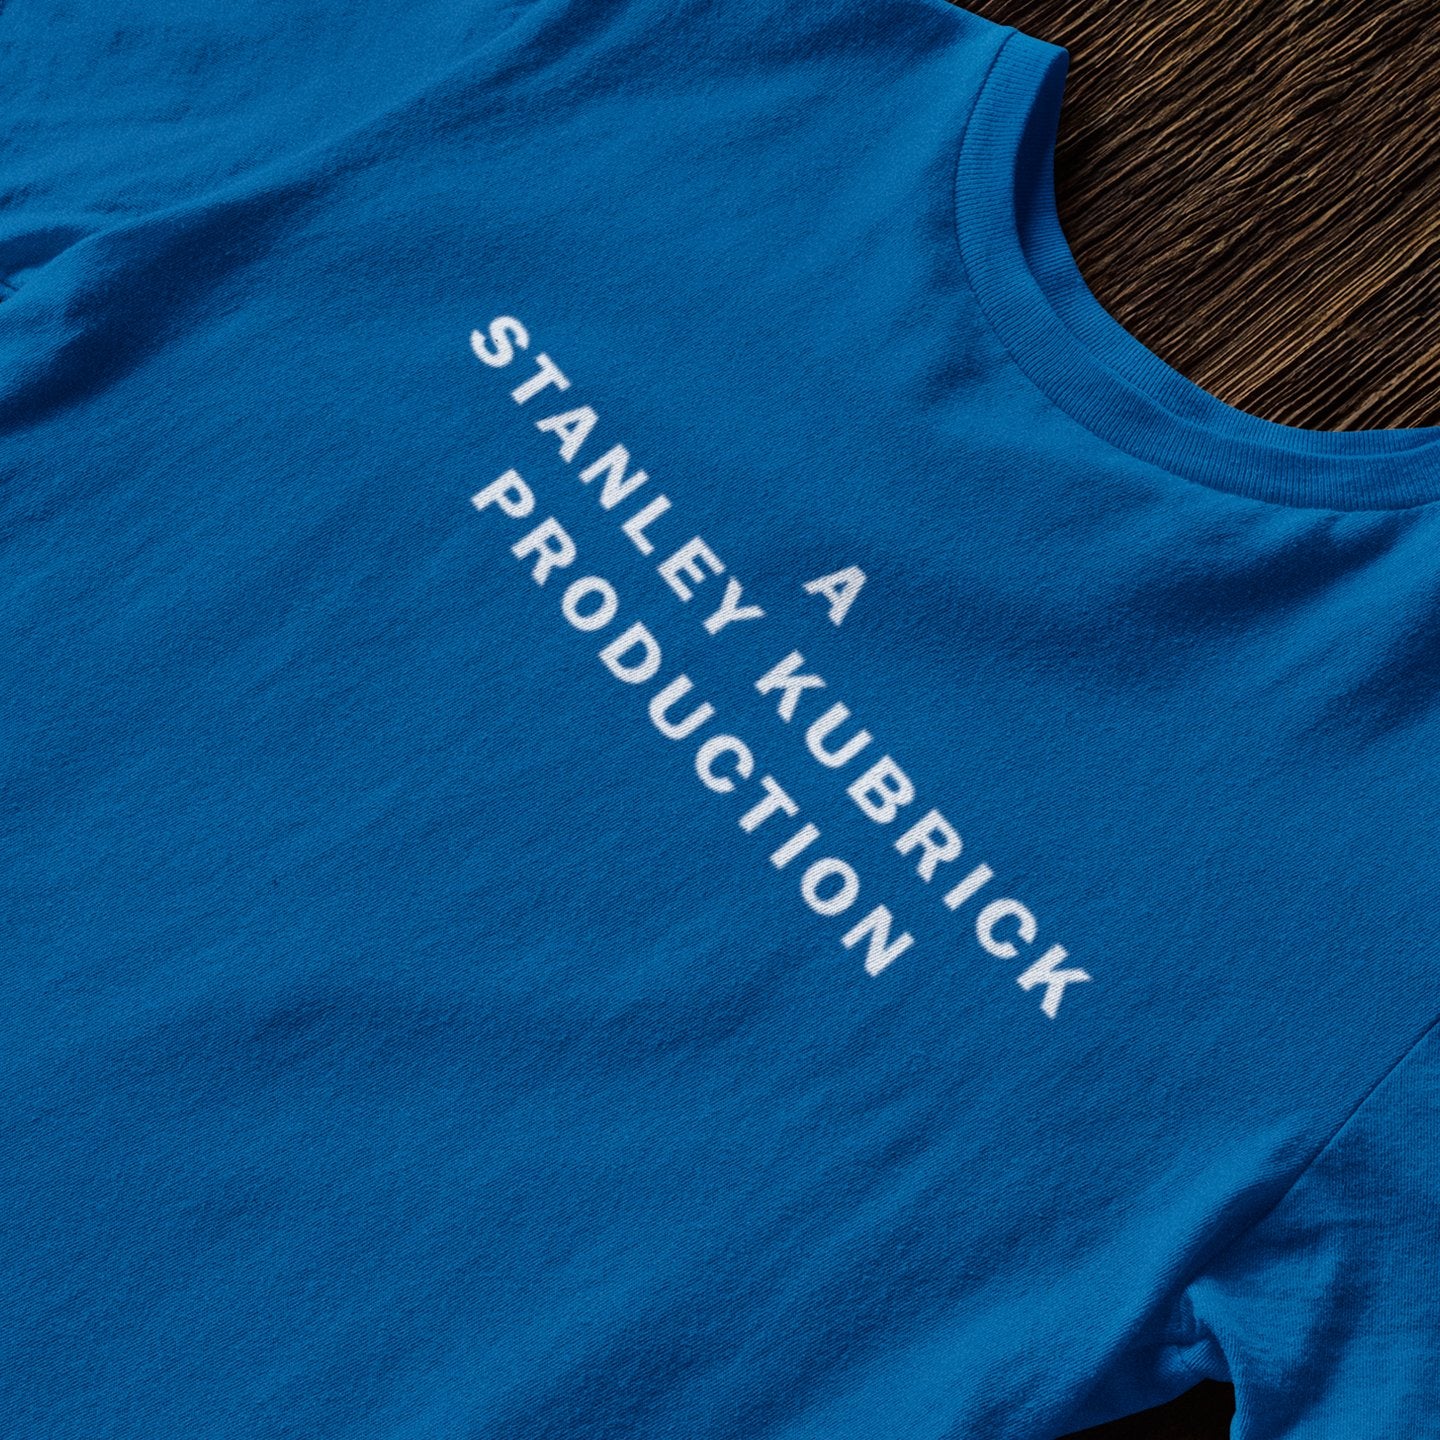 A Stanley Kubrick Production - T-Shirt